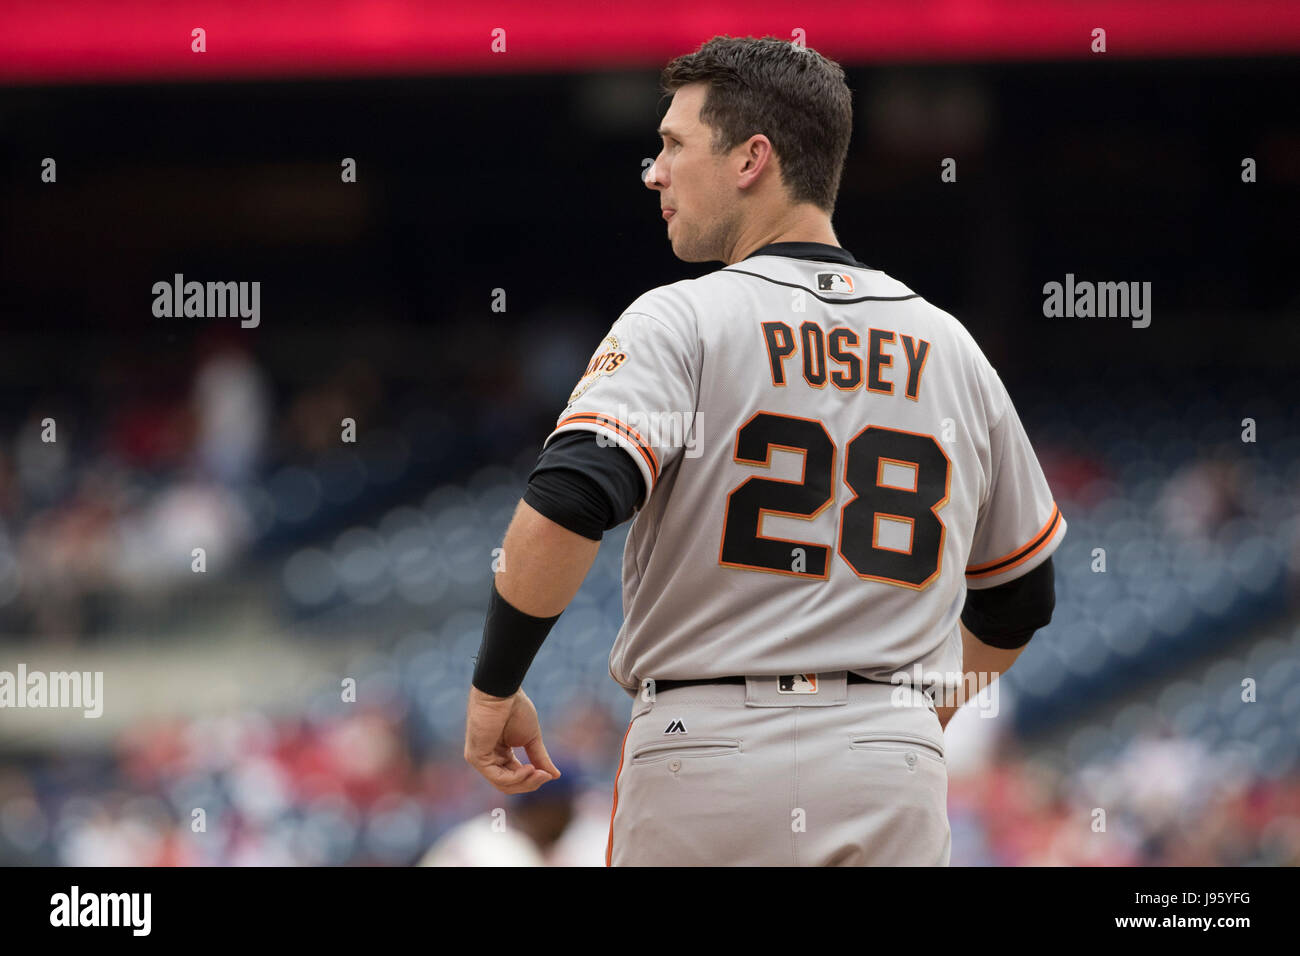 Philadelphia, Pennsylvania, USA. 4th June, 2017. San Francisco Giants' Buster Posey (28) looks on during the MLB game between the San Francisco Giants and Philadelphia Phillies at Citizens Bank Park in Philadelphia, Pennsylvania. The Philadelphia Phillies won 9-7. Christopher Szagola/CSM/Alamy Live News Stock Photo